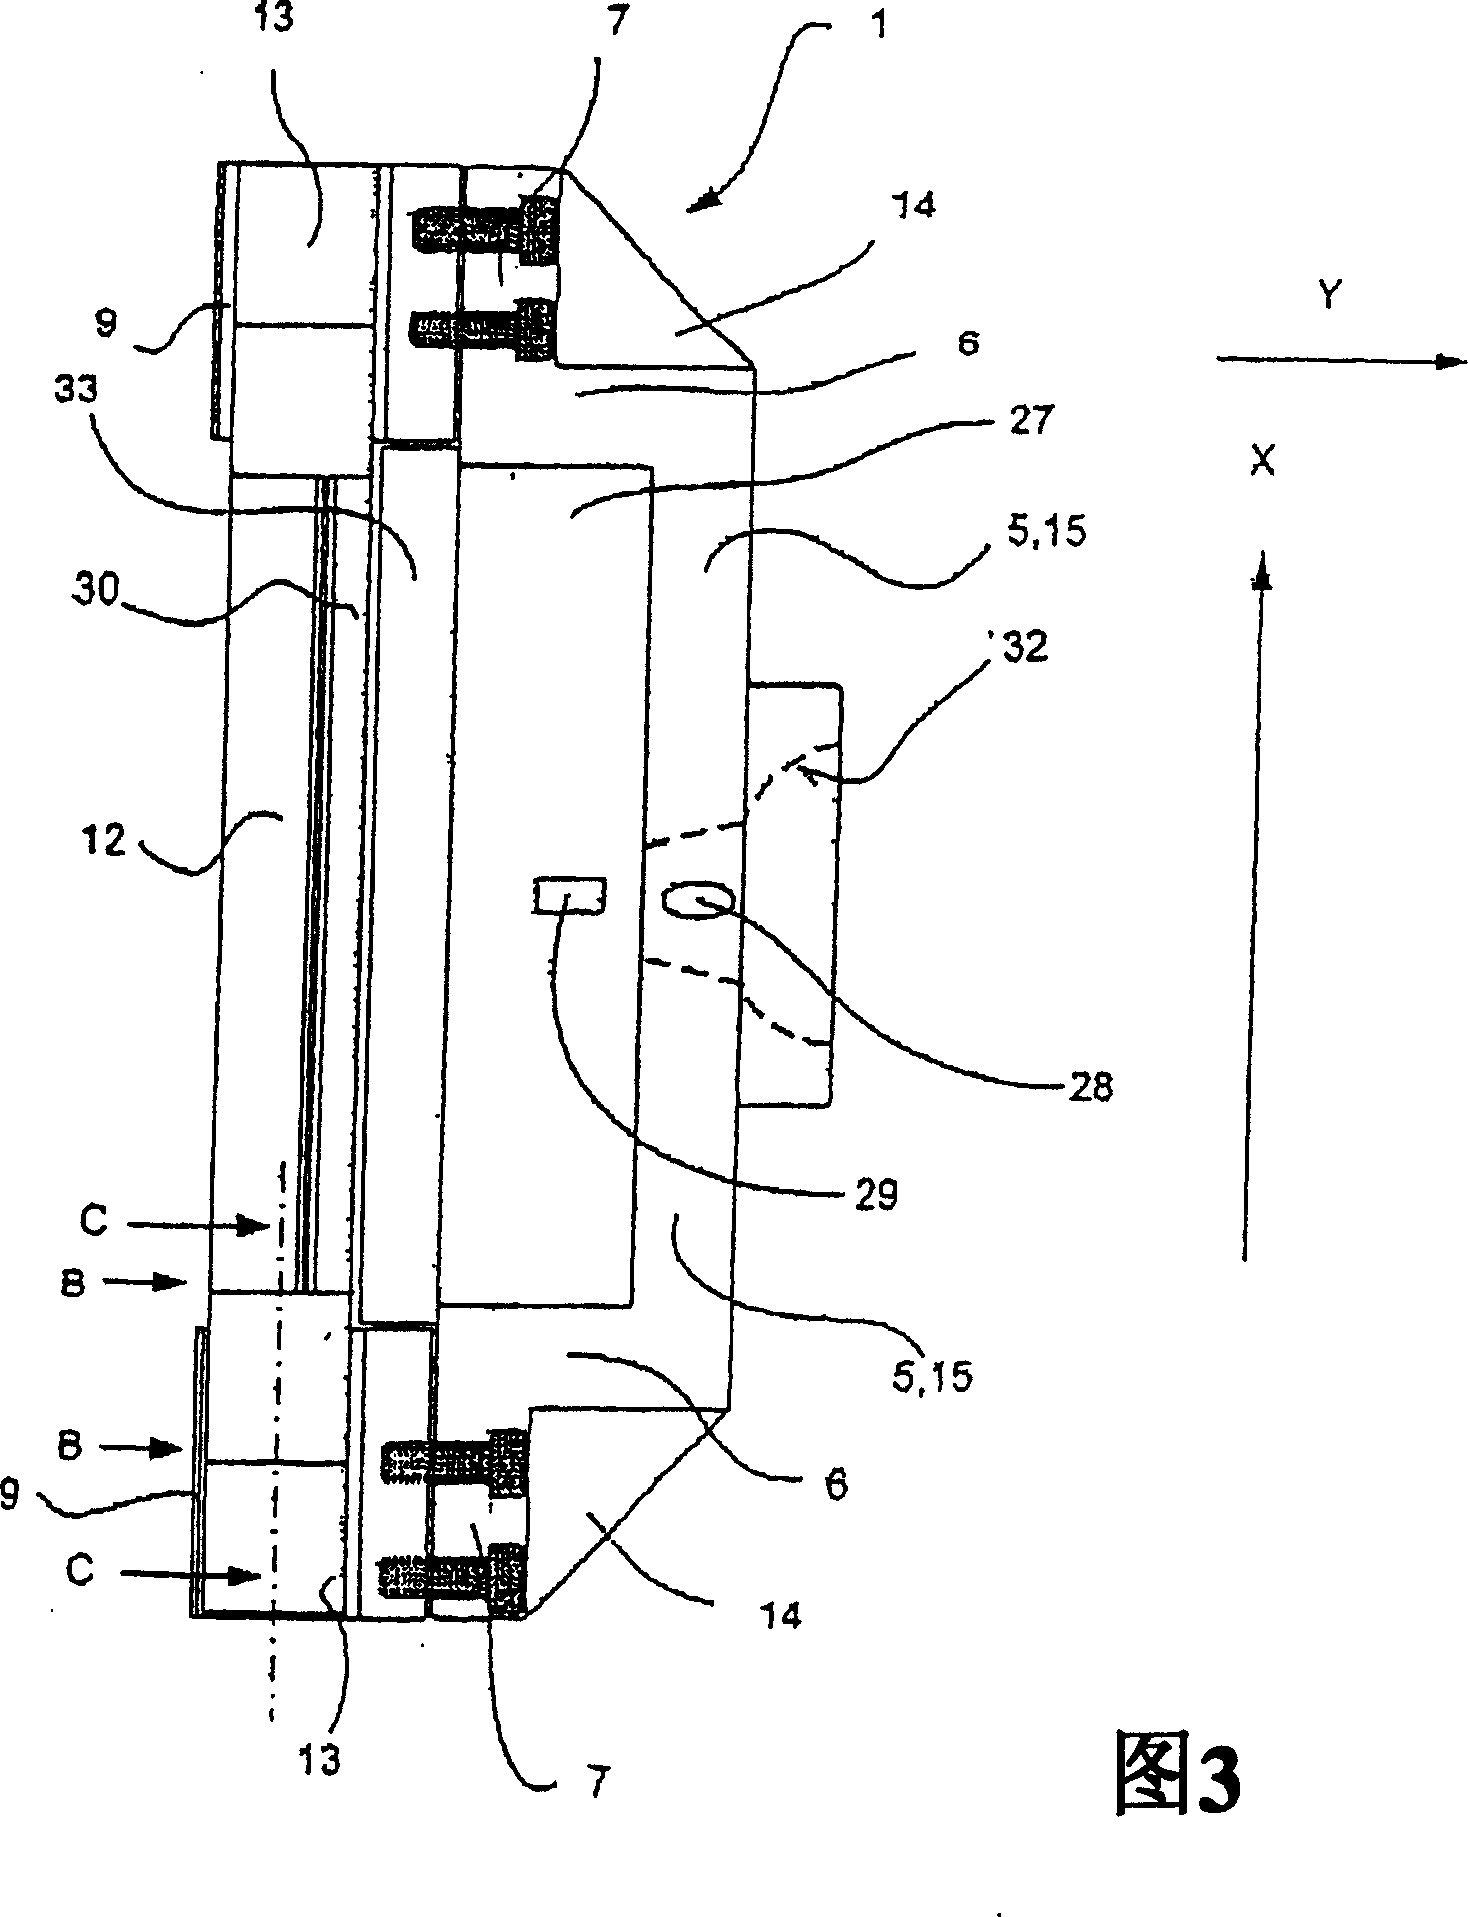 Measuring device for vehicle wheel load